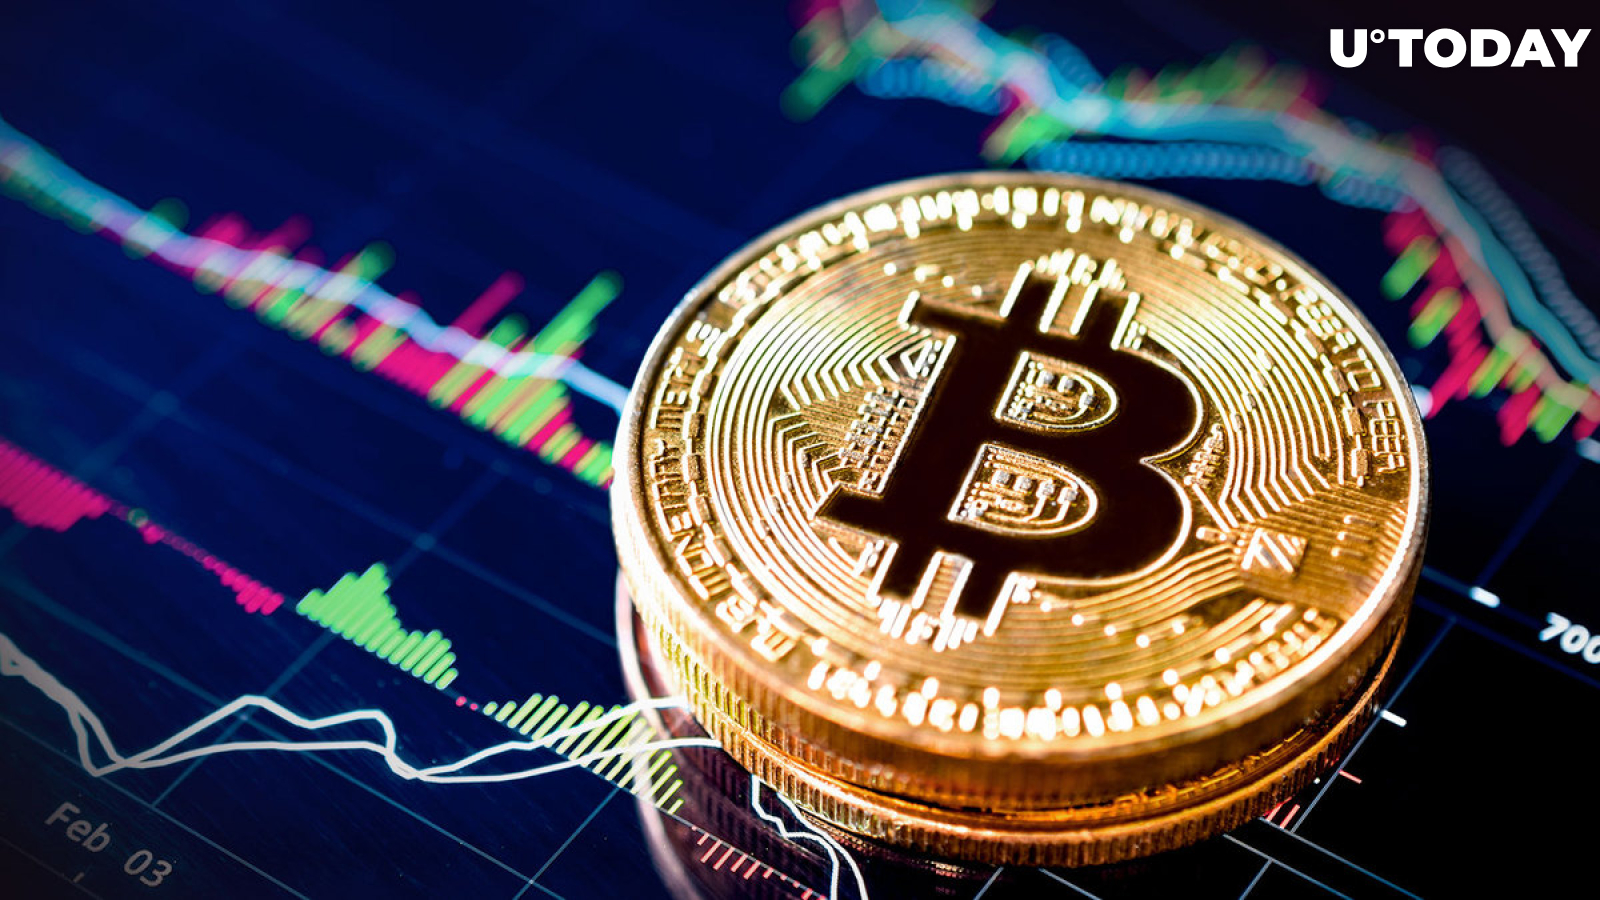 Bitcoin (BTC) Sees This Unusual Happening as Price Nears $29K